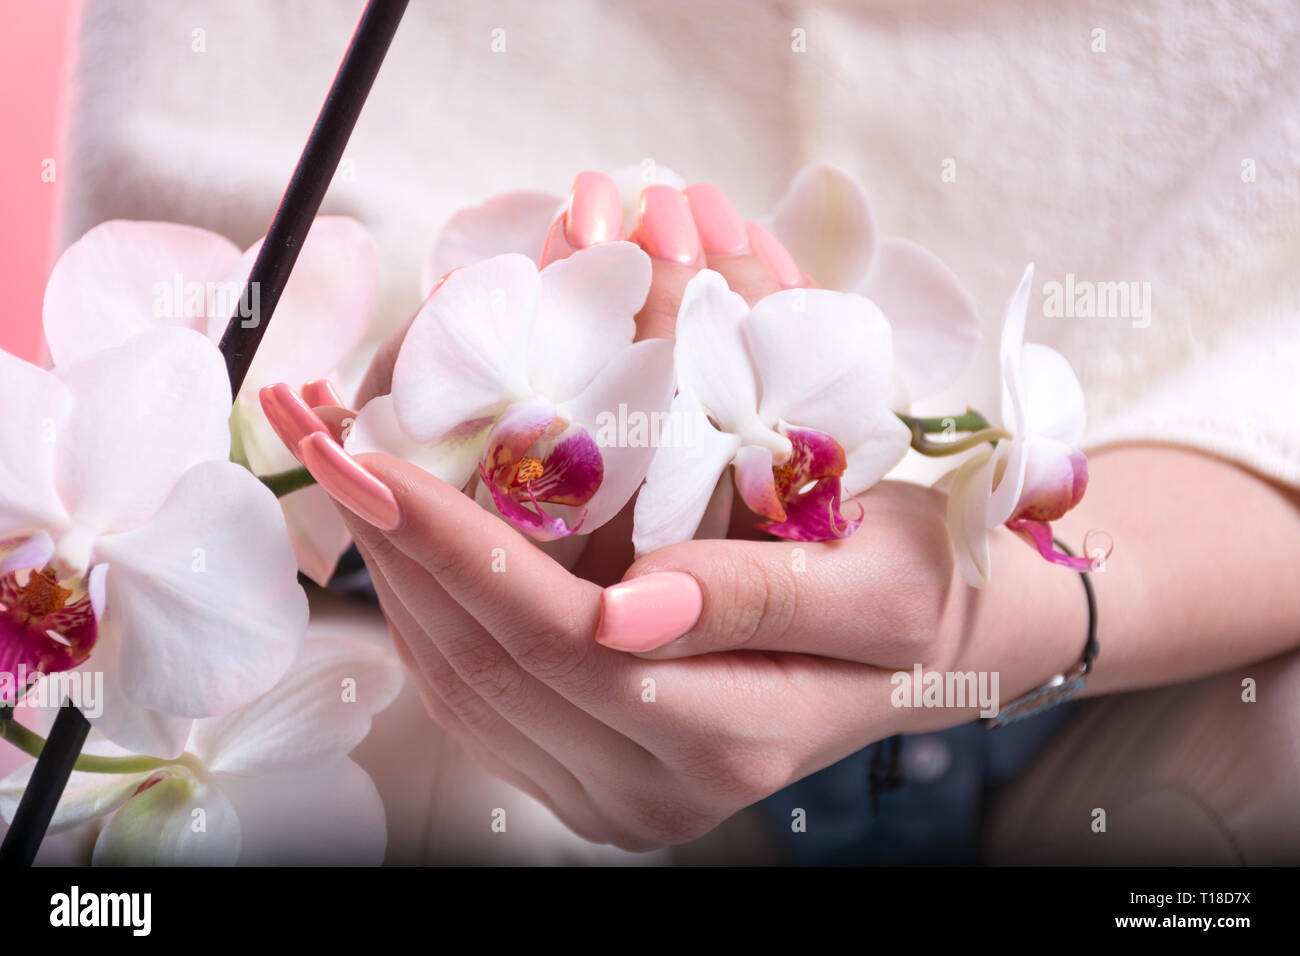 Young girl hands with pink spring manicure on nails holding white orchids flower in beauty studio. Manicure and Beauty concept. Close up Stock Photo